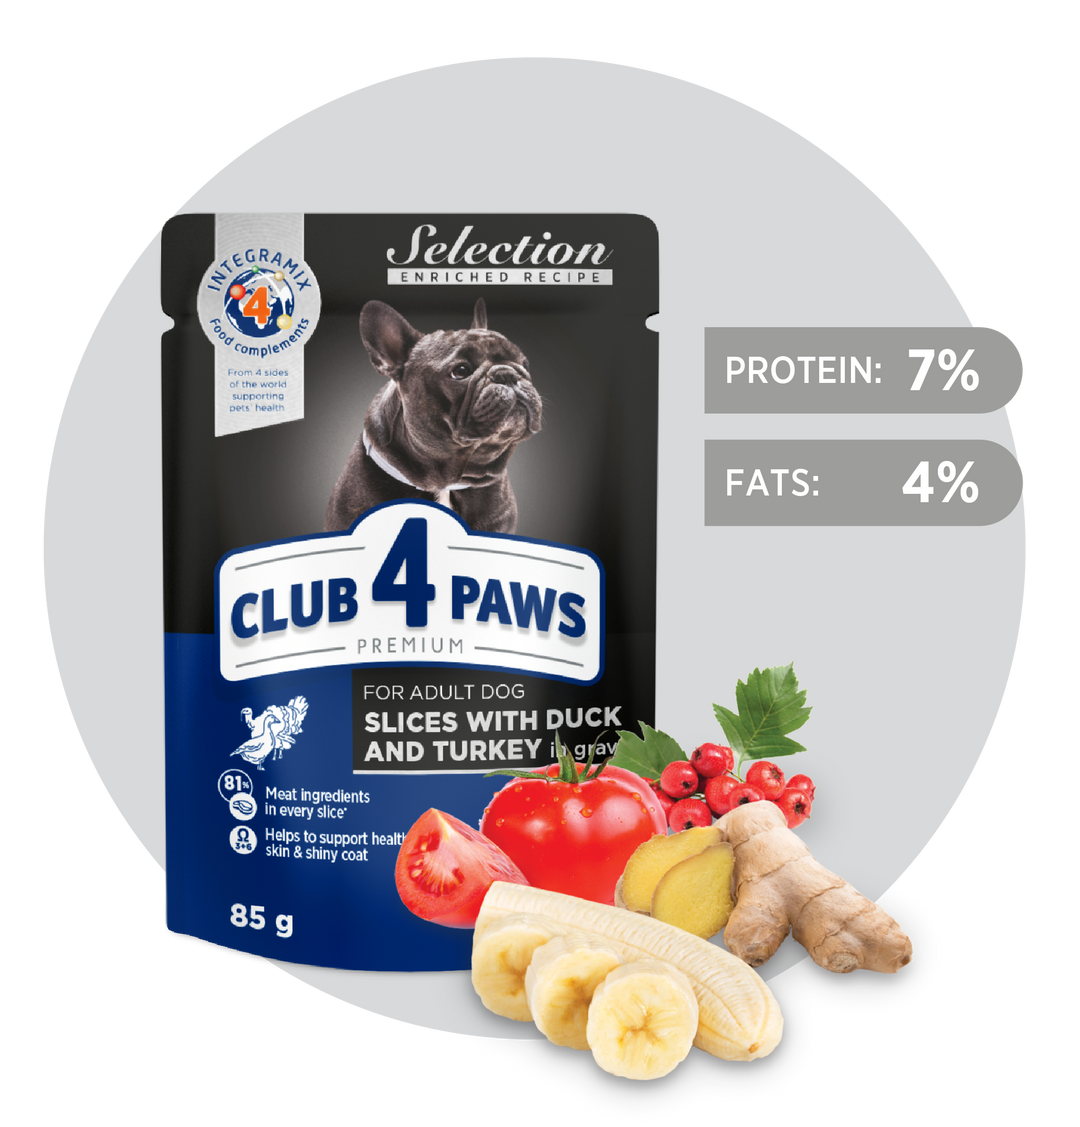 CLUB 4 PAWS Premium Slices with Duck & Turkey in Gravy. Complete Wet Food for Adult dogs of Small Breeds